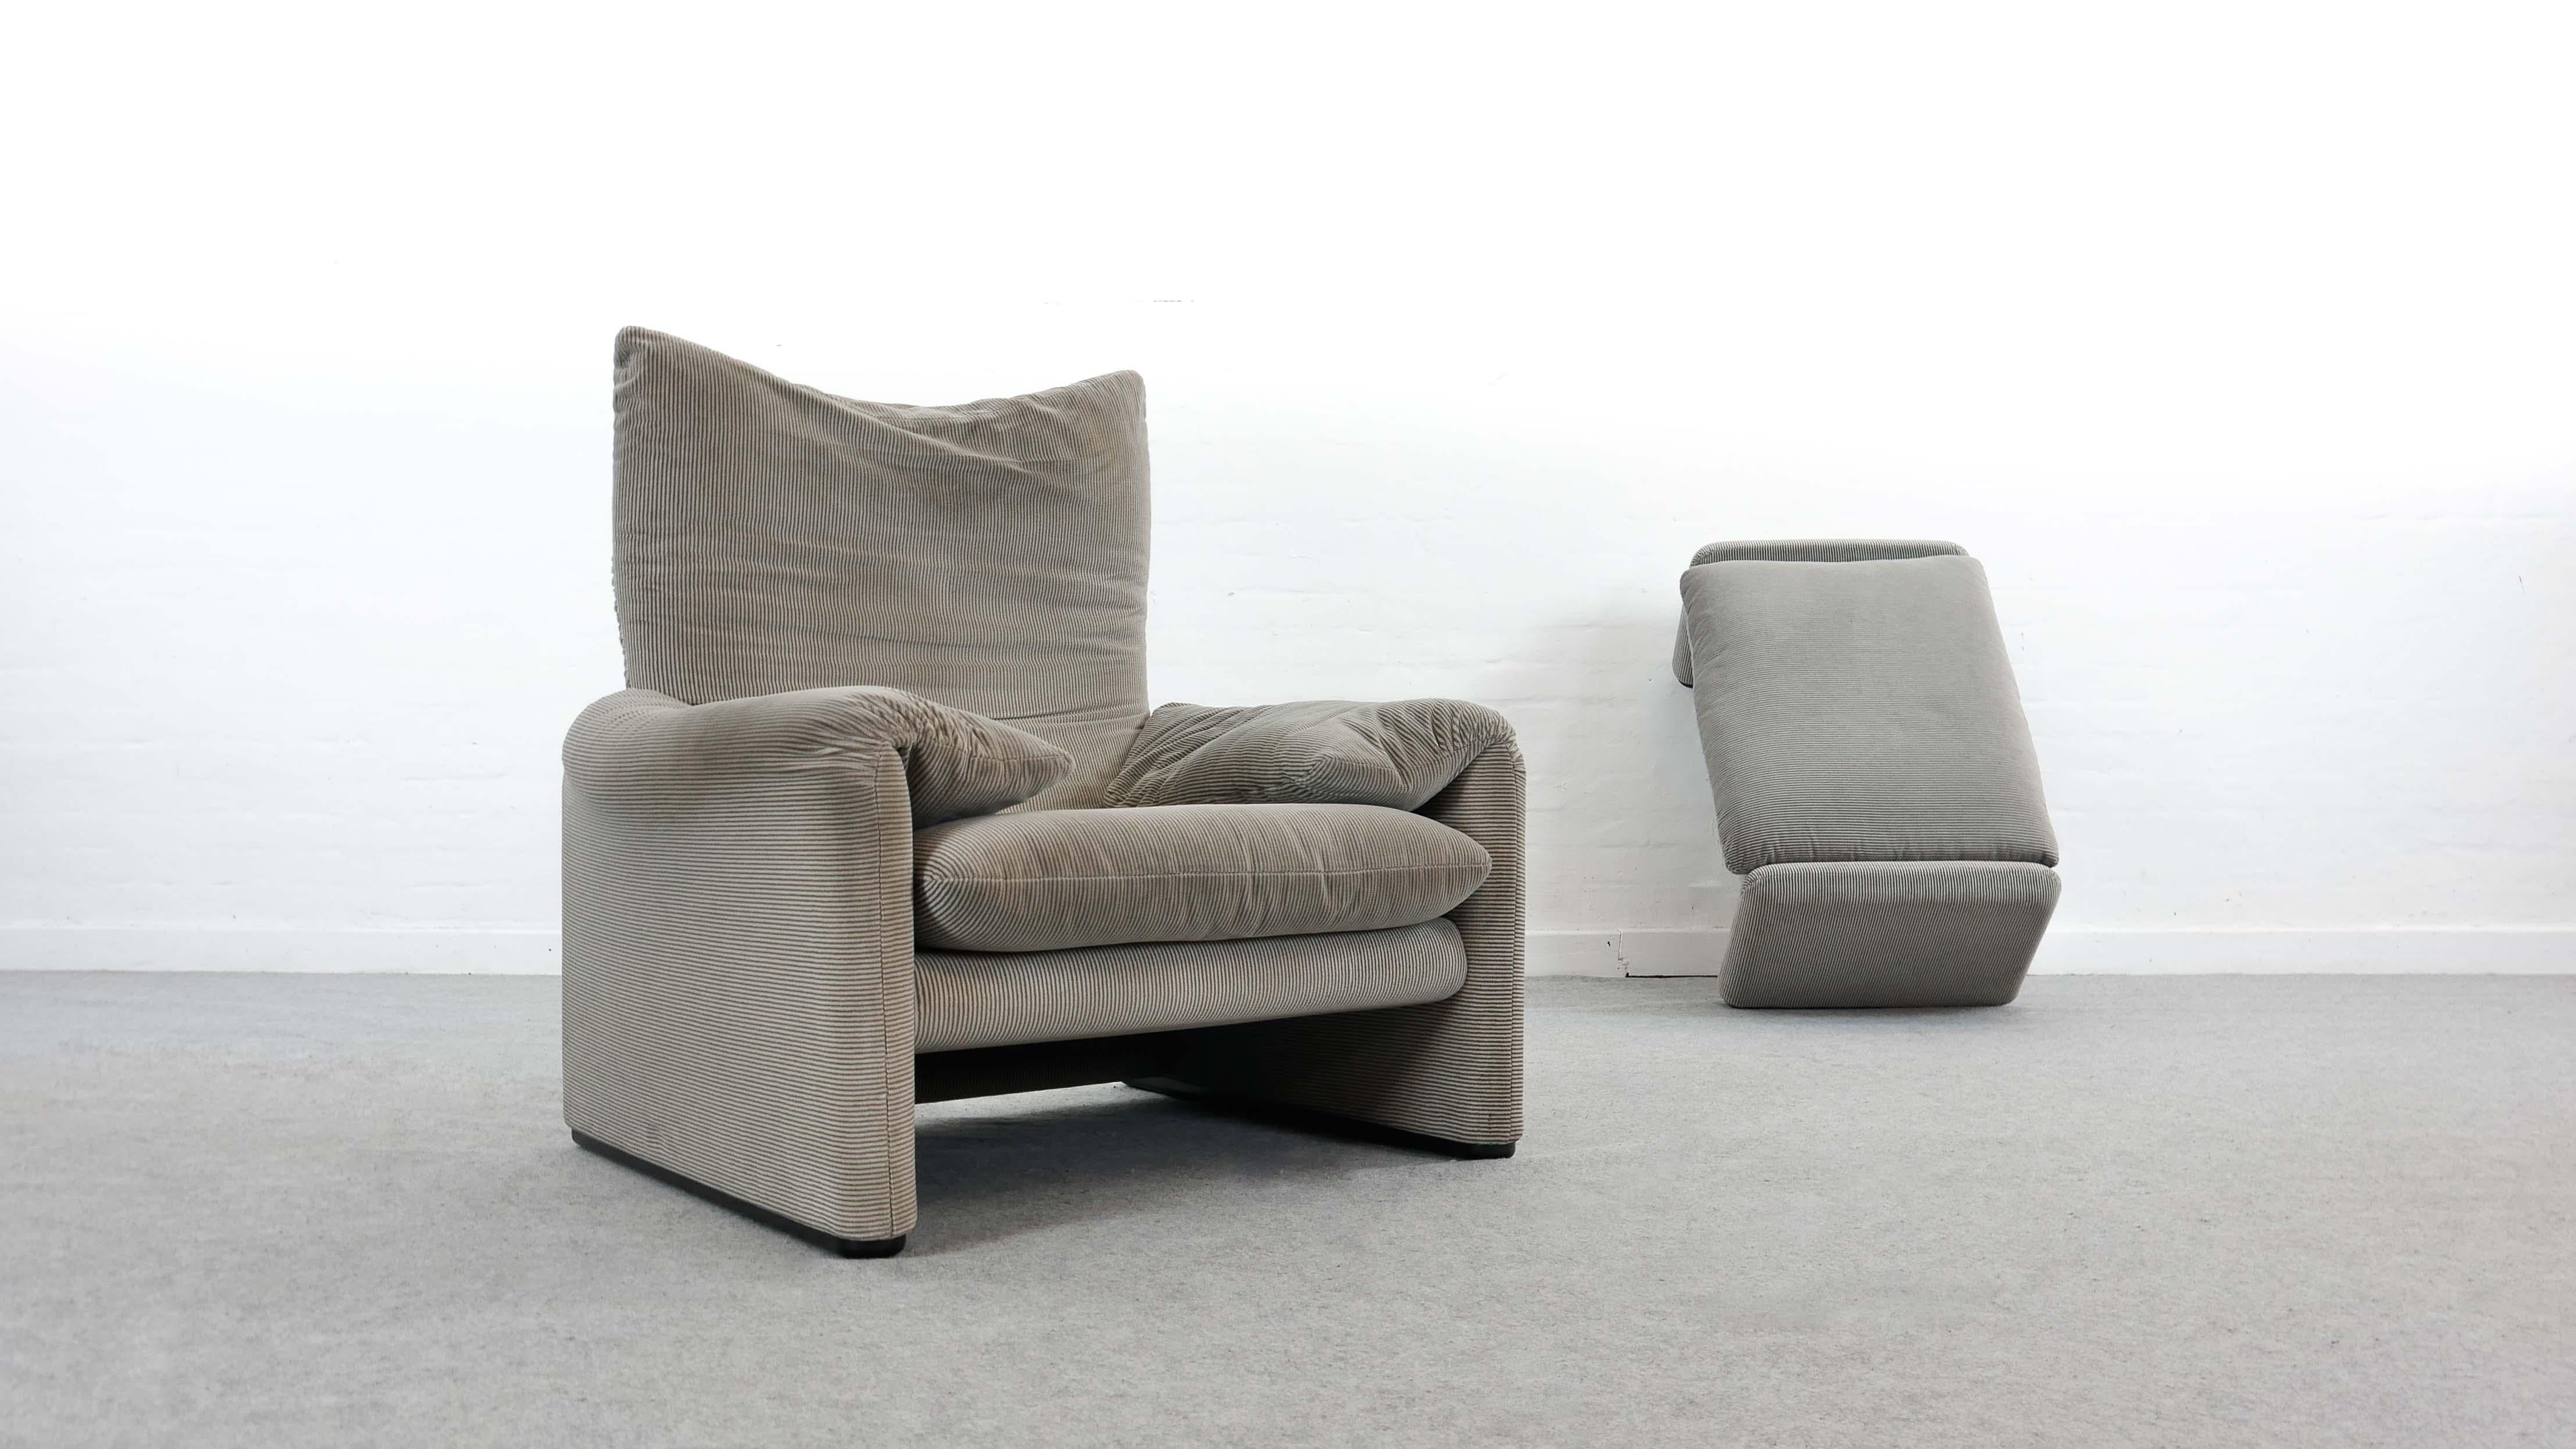 Contemporary Cassina Maralunga Chair and Ottoman /Stool in Grey Striped Fabrics